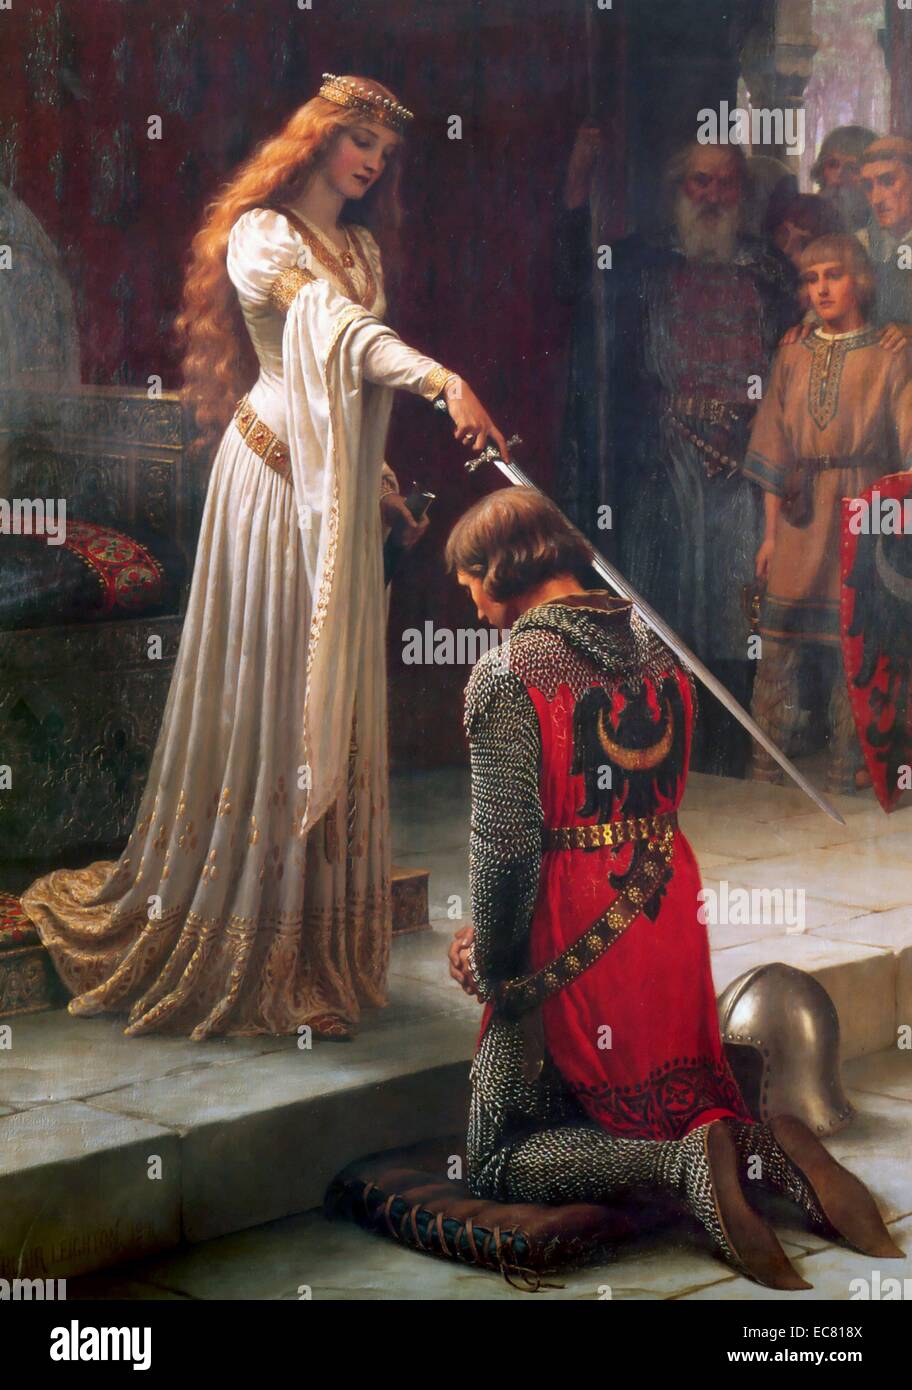 The Accolade by Lord Leighton. Edmund Blair Leighton (1852 –1922) was an English painter of historical genre scenes, specializing in Regency and medieval subjects. Stock Photo